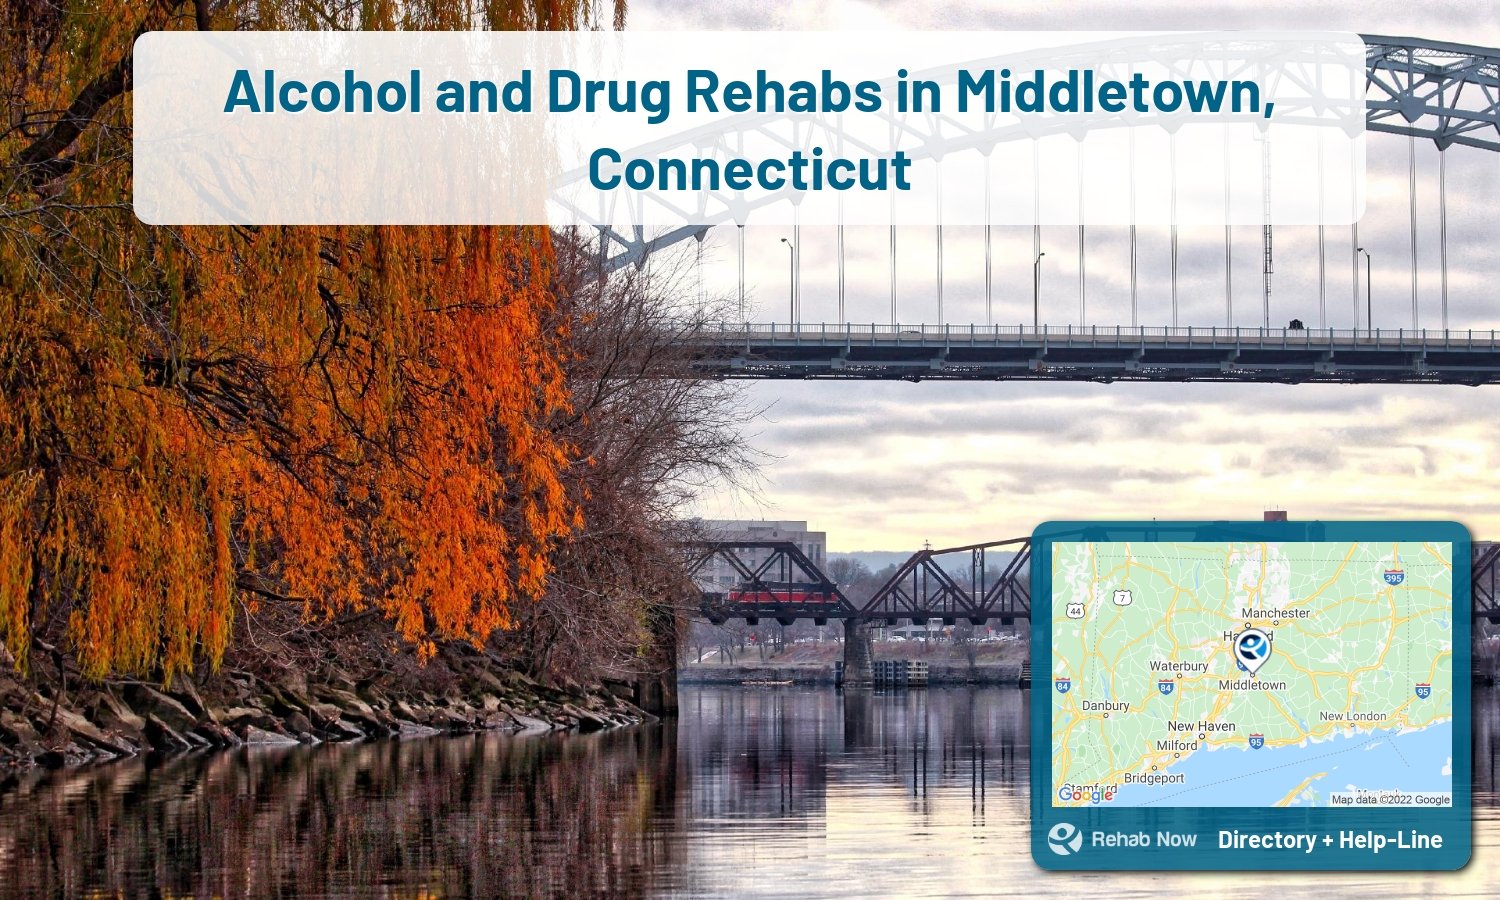 Ready to pick a rehab center in Middletown? Get off alcohol, opiates, and other drugs, by selecting top drug rehab centers in Connecticut